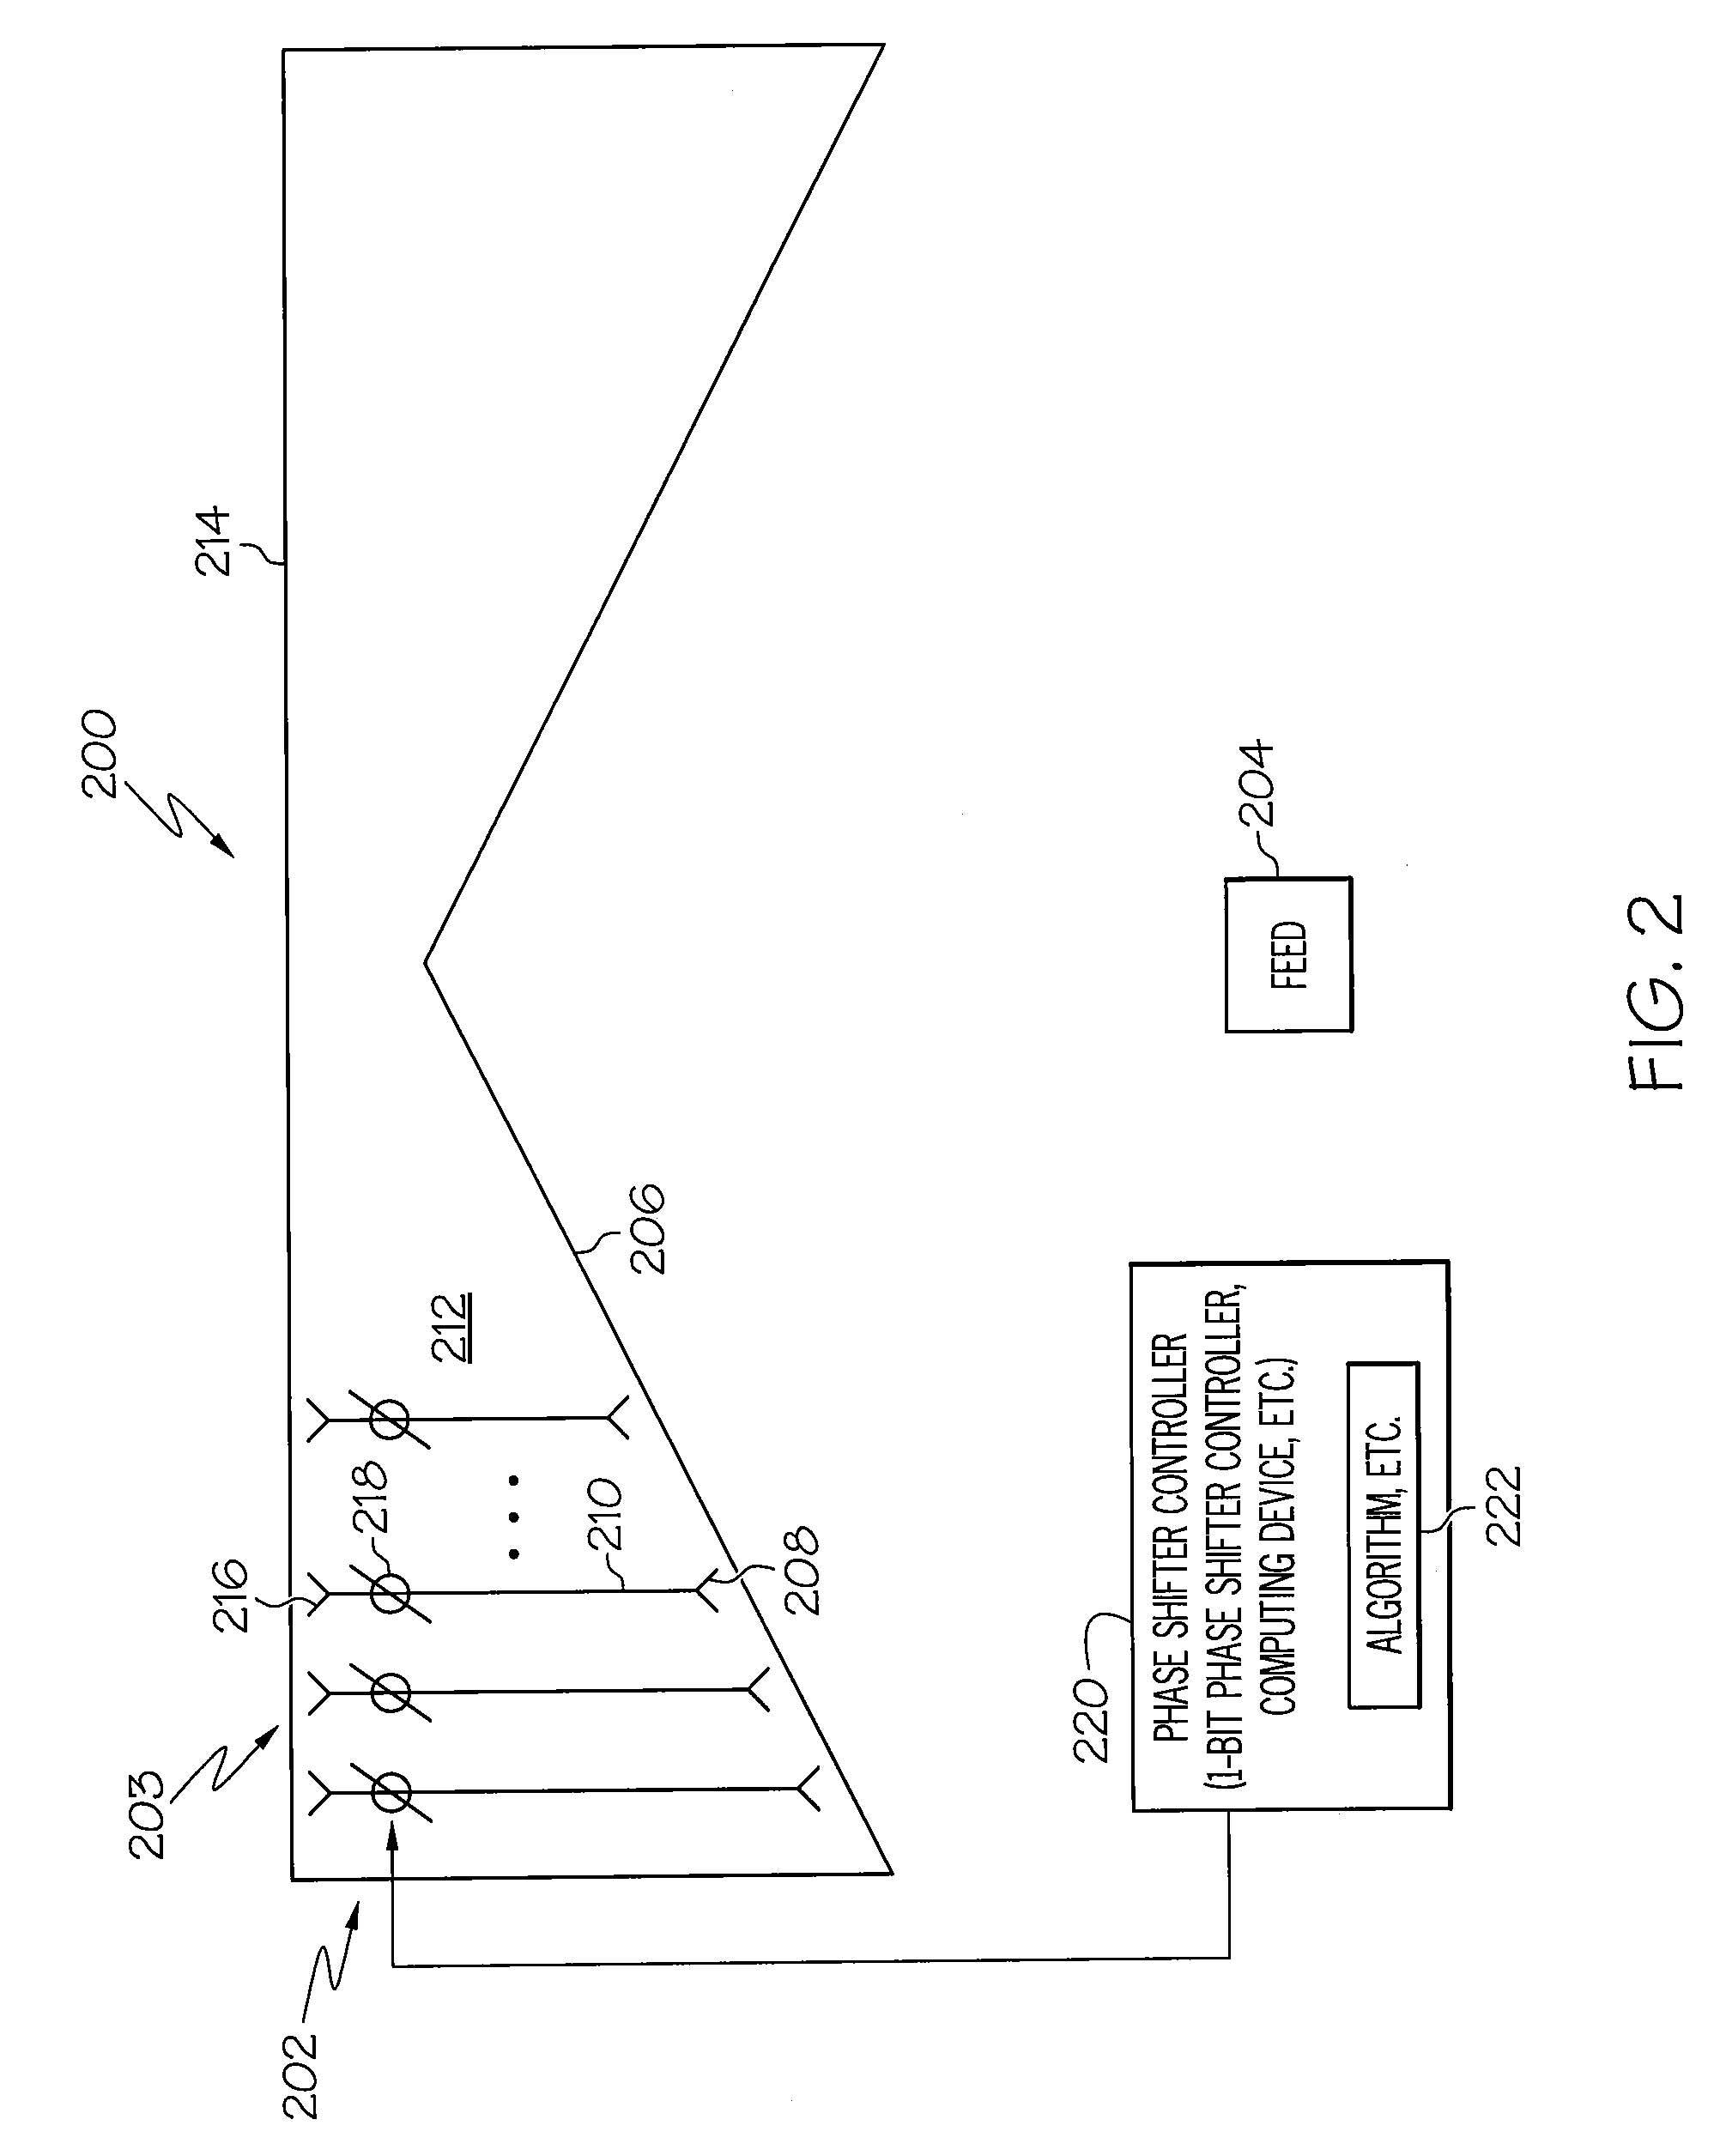 Antenna array including a phase shifter array controller and algorithm for steering the array